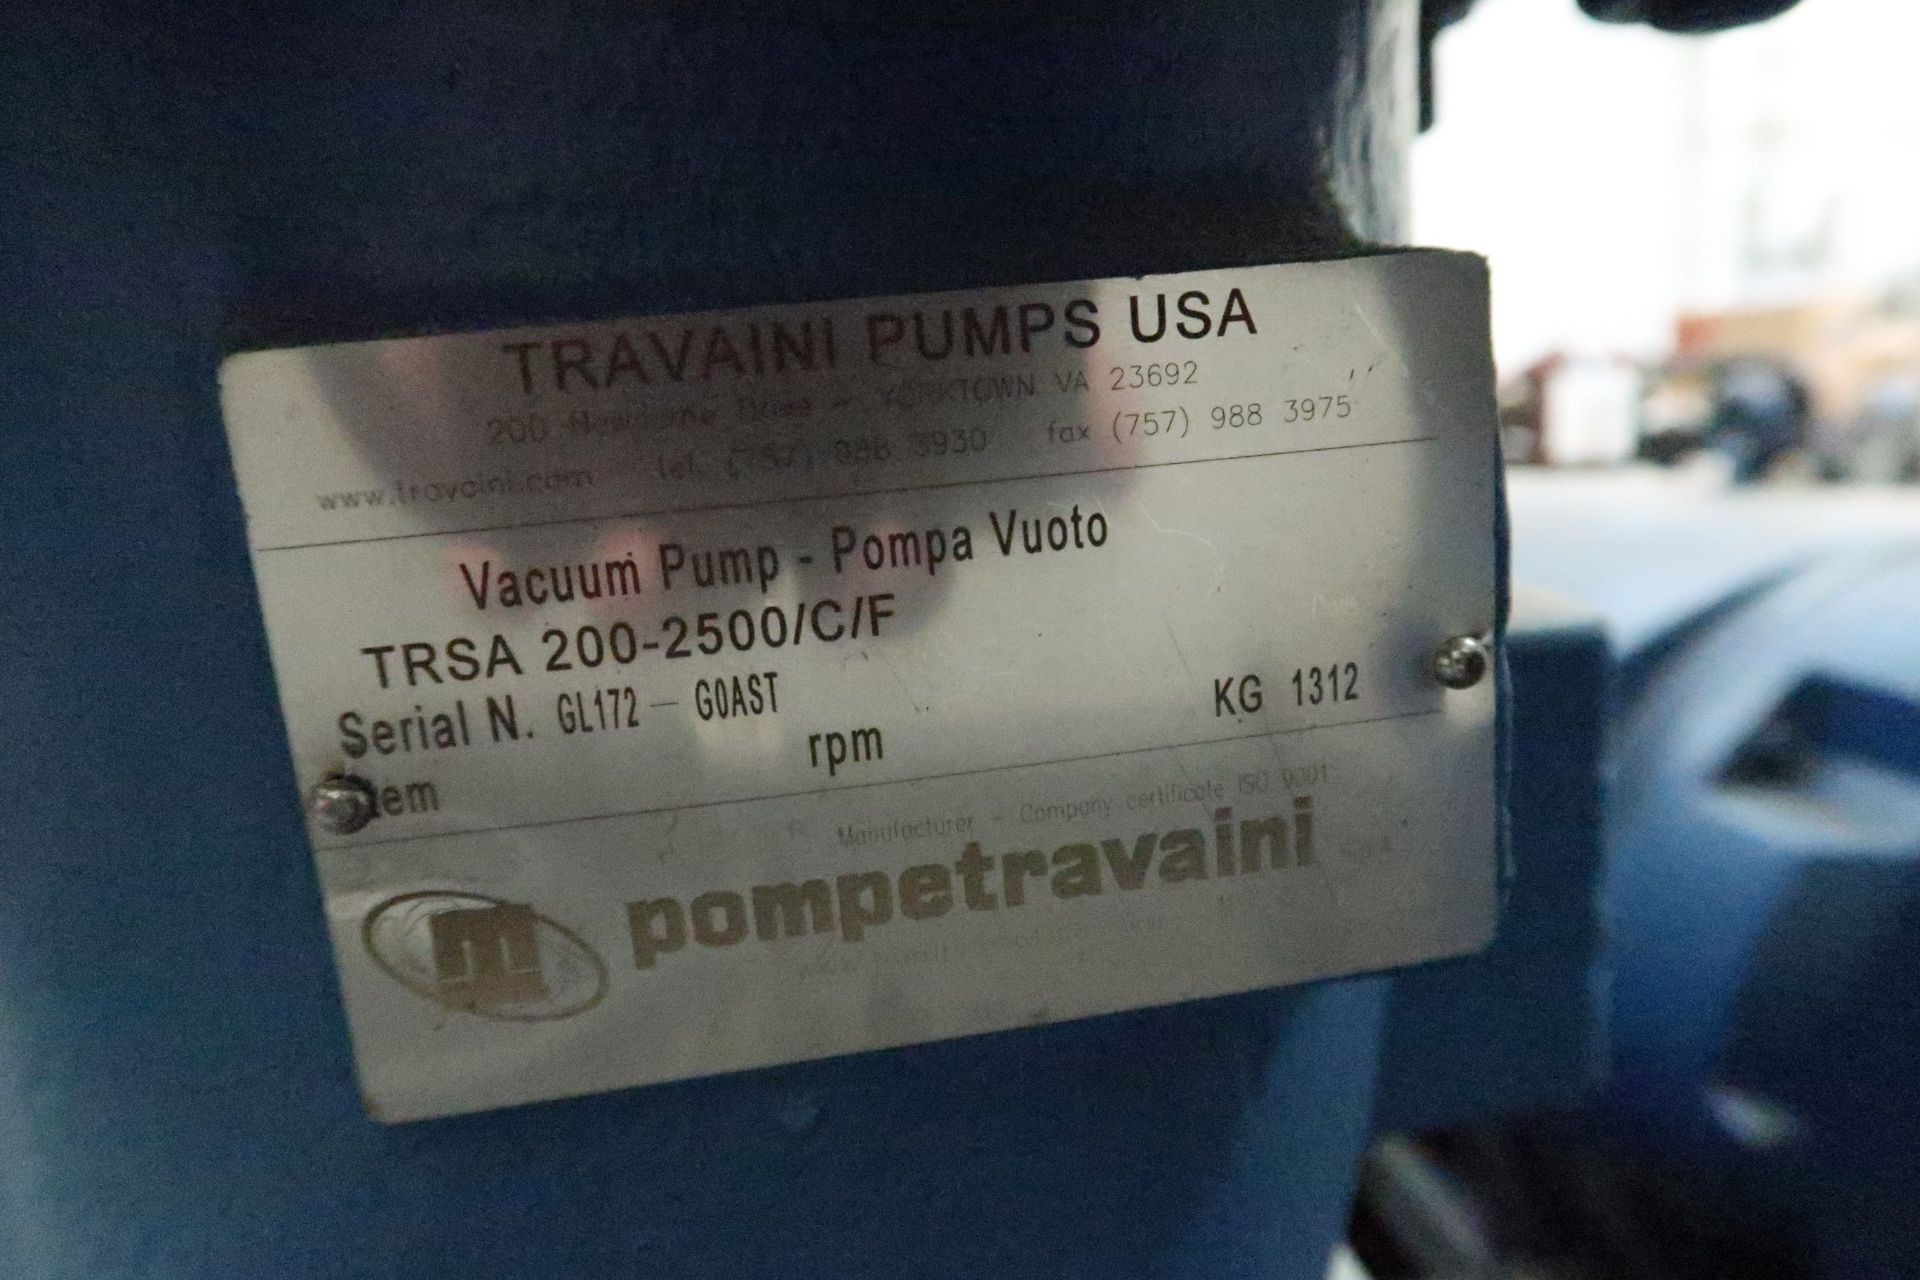 100 HP DYNASEAL TRAVAINI MODEL TRSA200/2500/C/F SKID MOUNTED VACUUM PUMP WITH CONTROL PANEL - Image 7 of 7